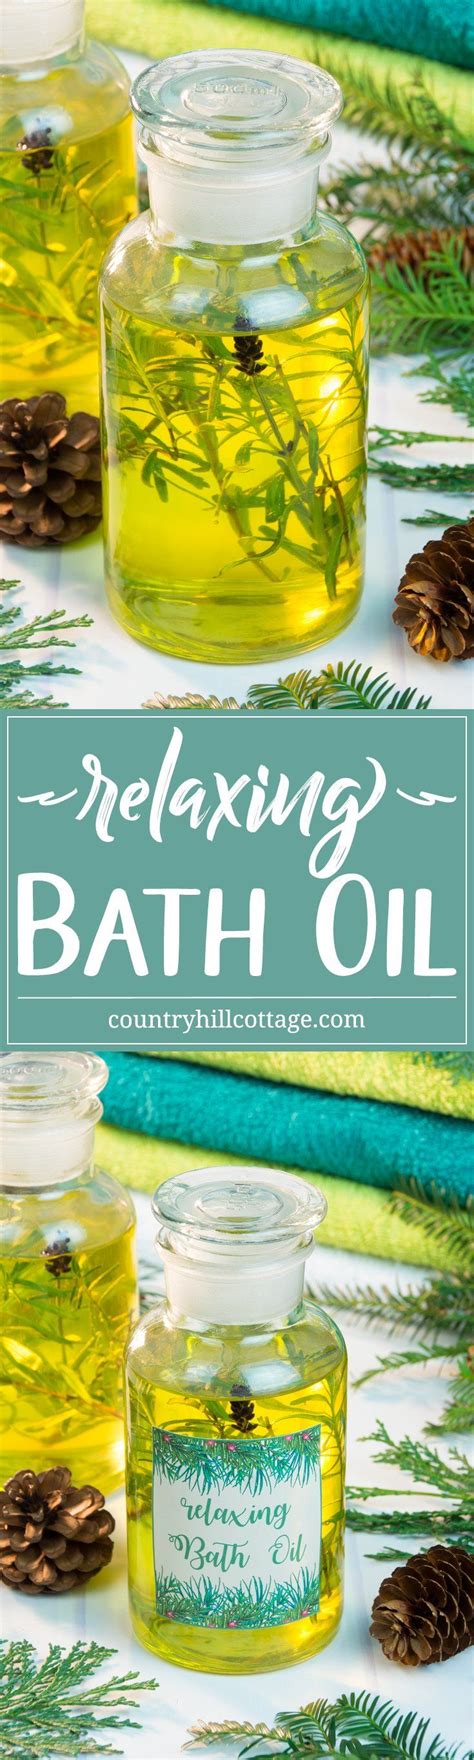 Soothe Away The Cares Of The Day With A Relaxing Bath Oil That Evokes